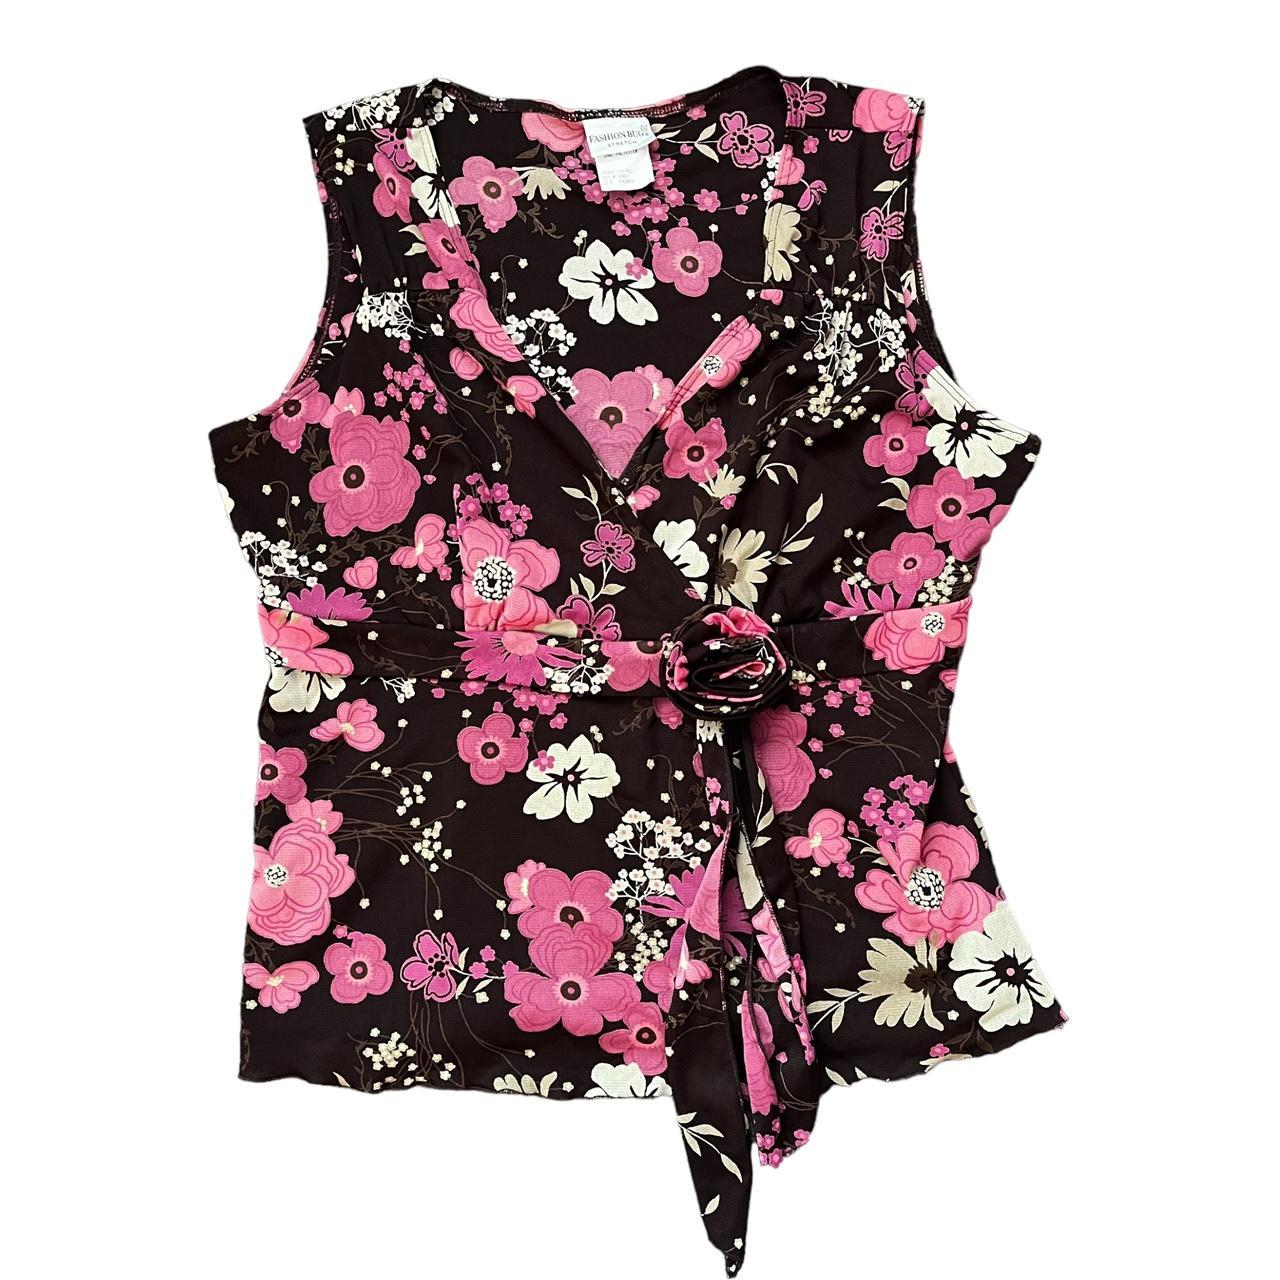 Fashion Baby Women's Brown and Pink Vest